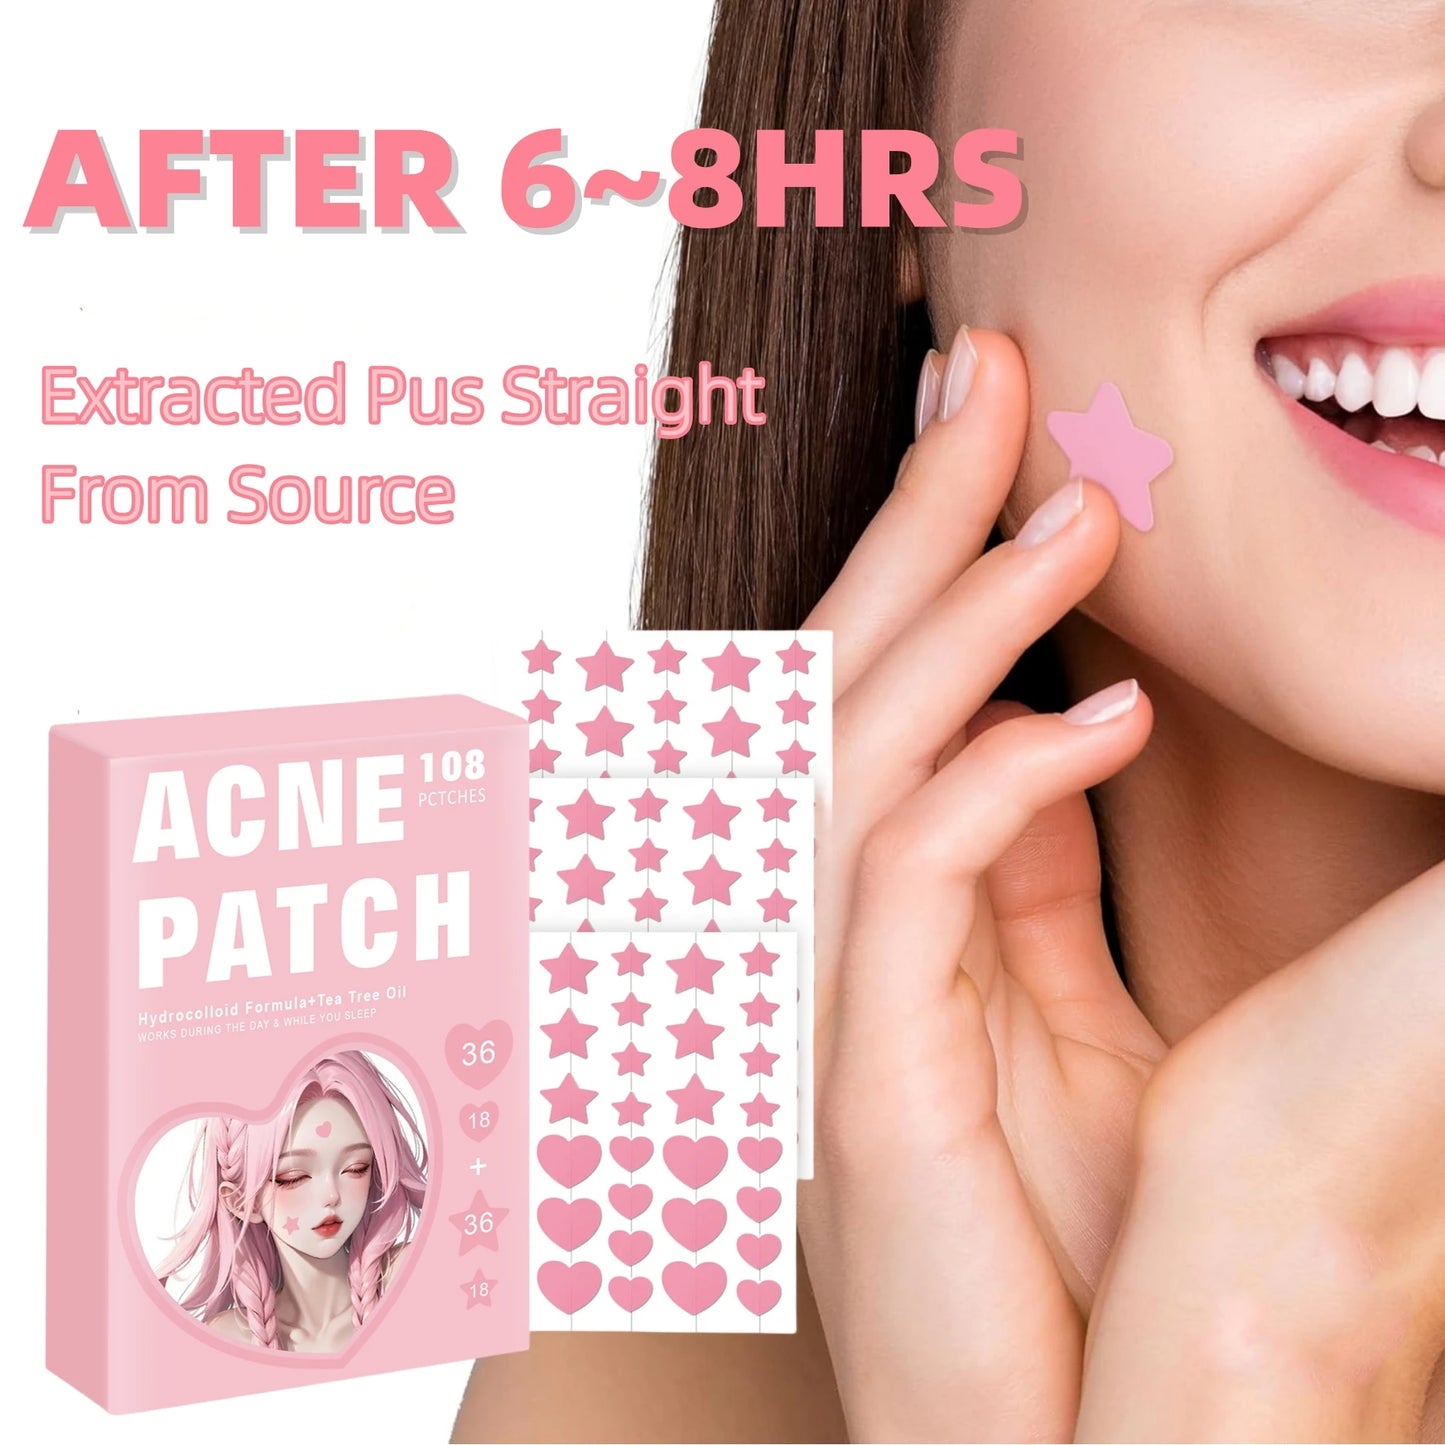 108 Acne Patch Pimple Patch, Pink Heart & Star Shaped Acne Absorbing Cover Patch, Hydrocolloid Acne Patches For Face Zit Patch A